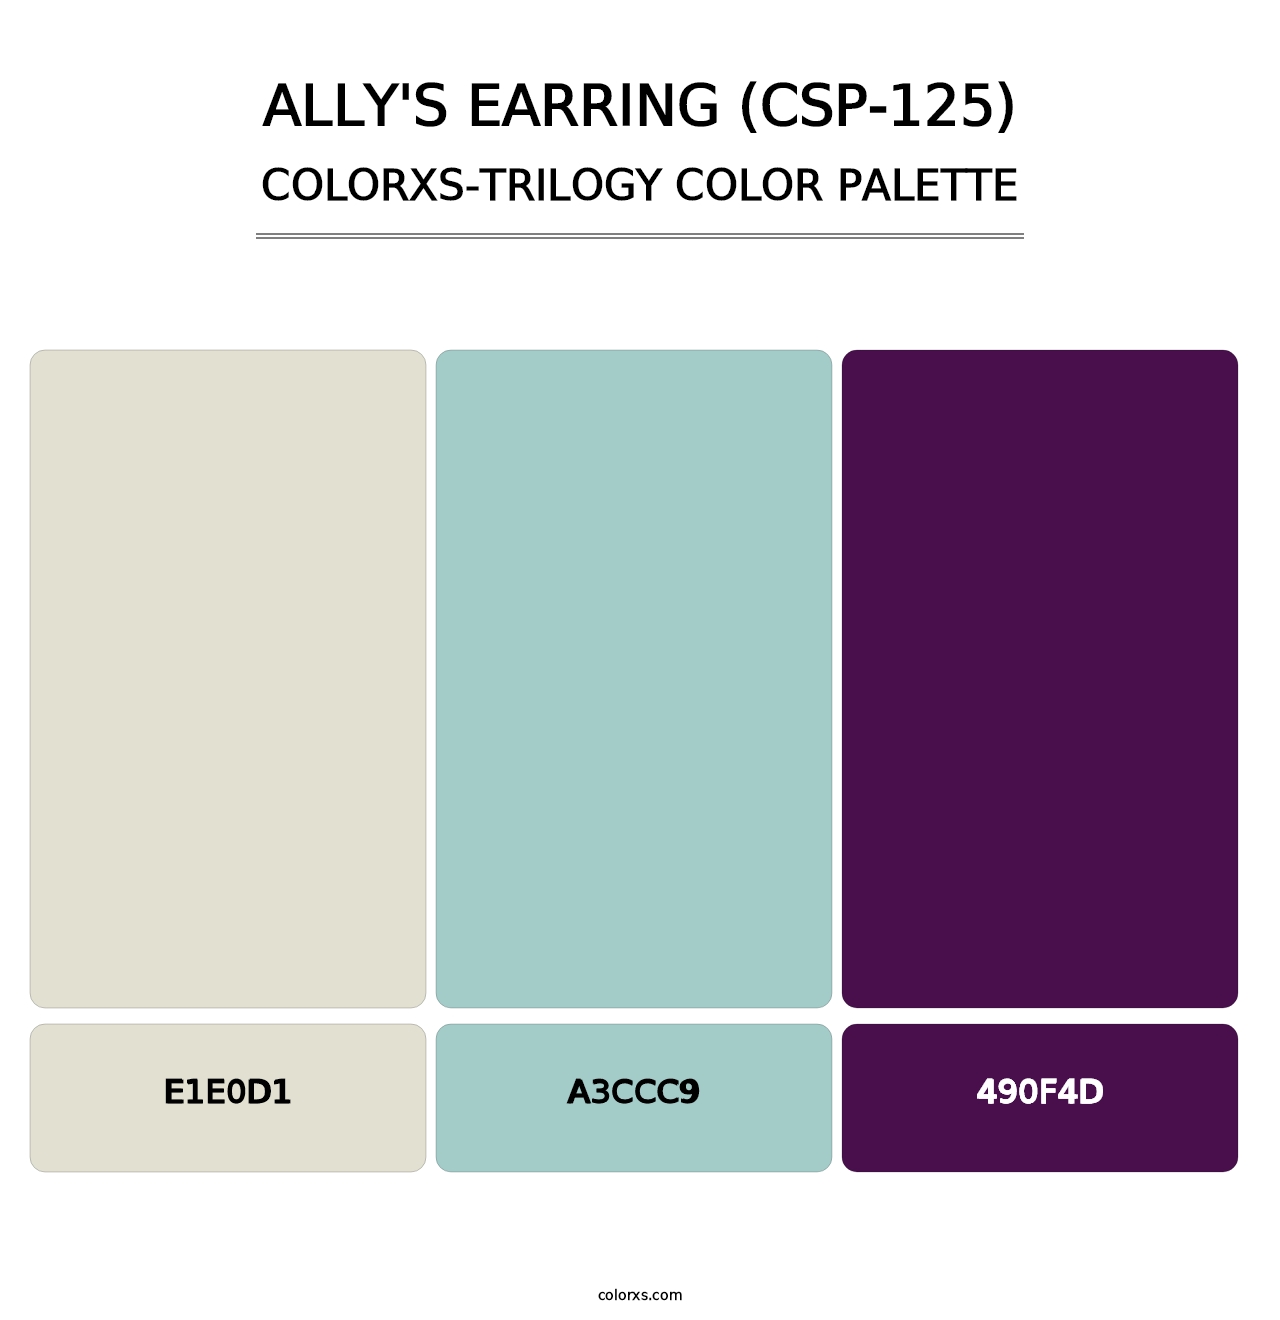 Ally's Earring (CSP-125) - Colorxs Trilogy Palette